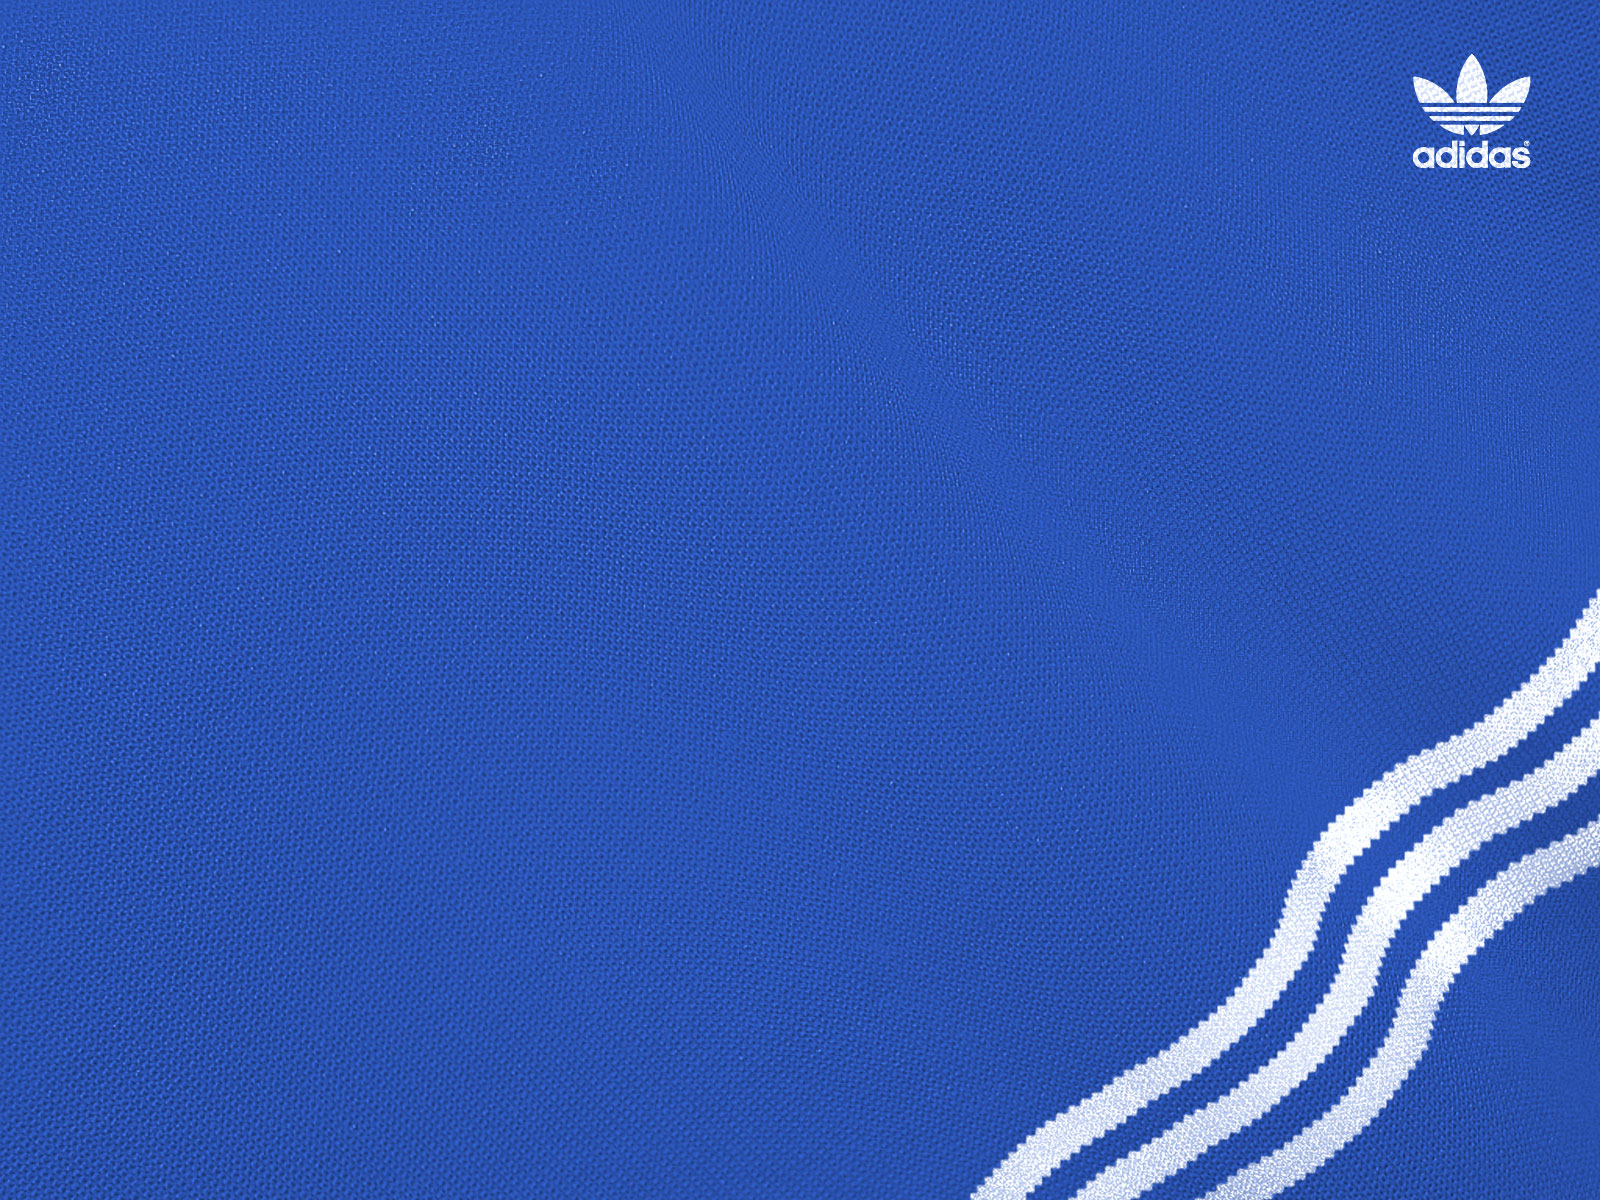 Adidas Blue Wallpaper And Image Pictures Photos